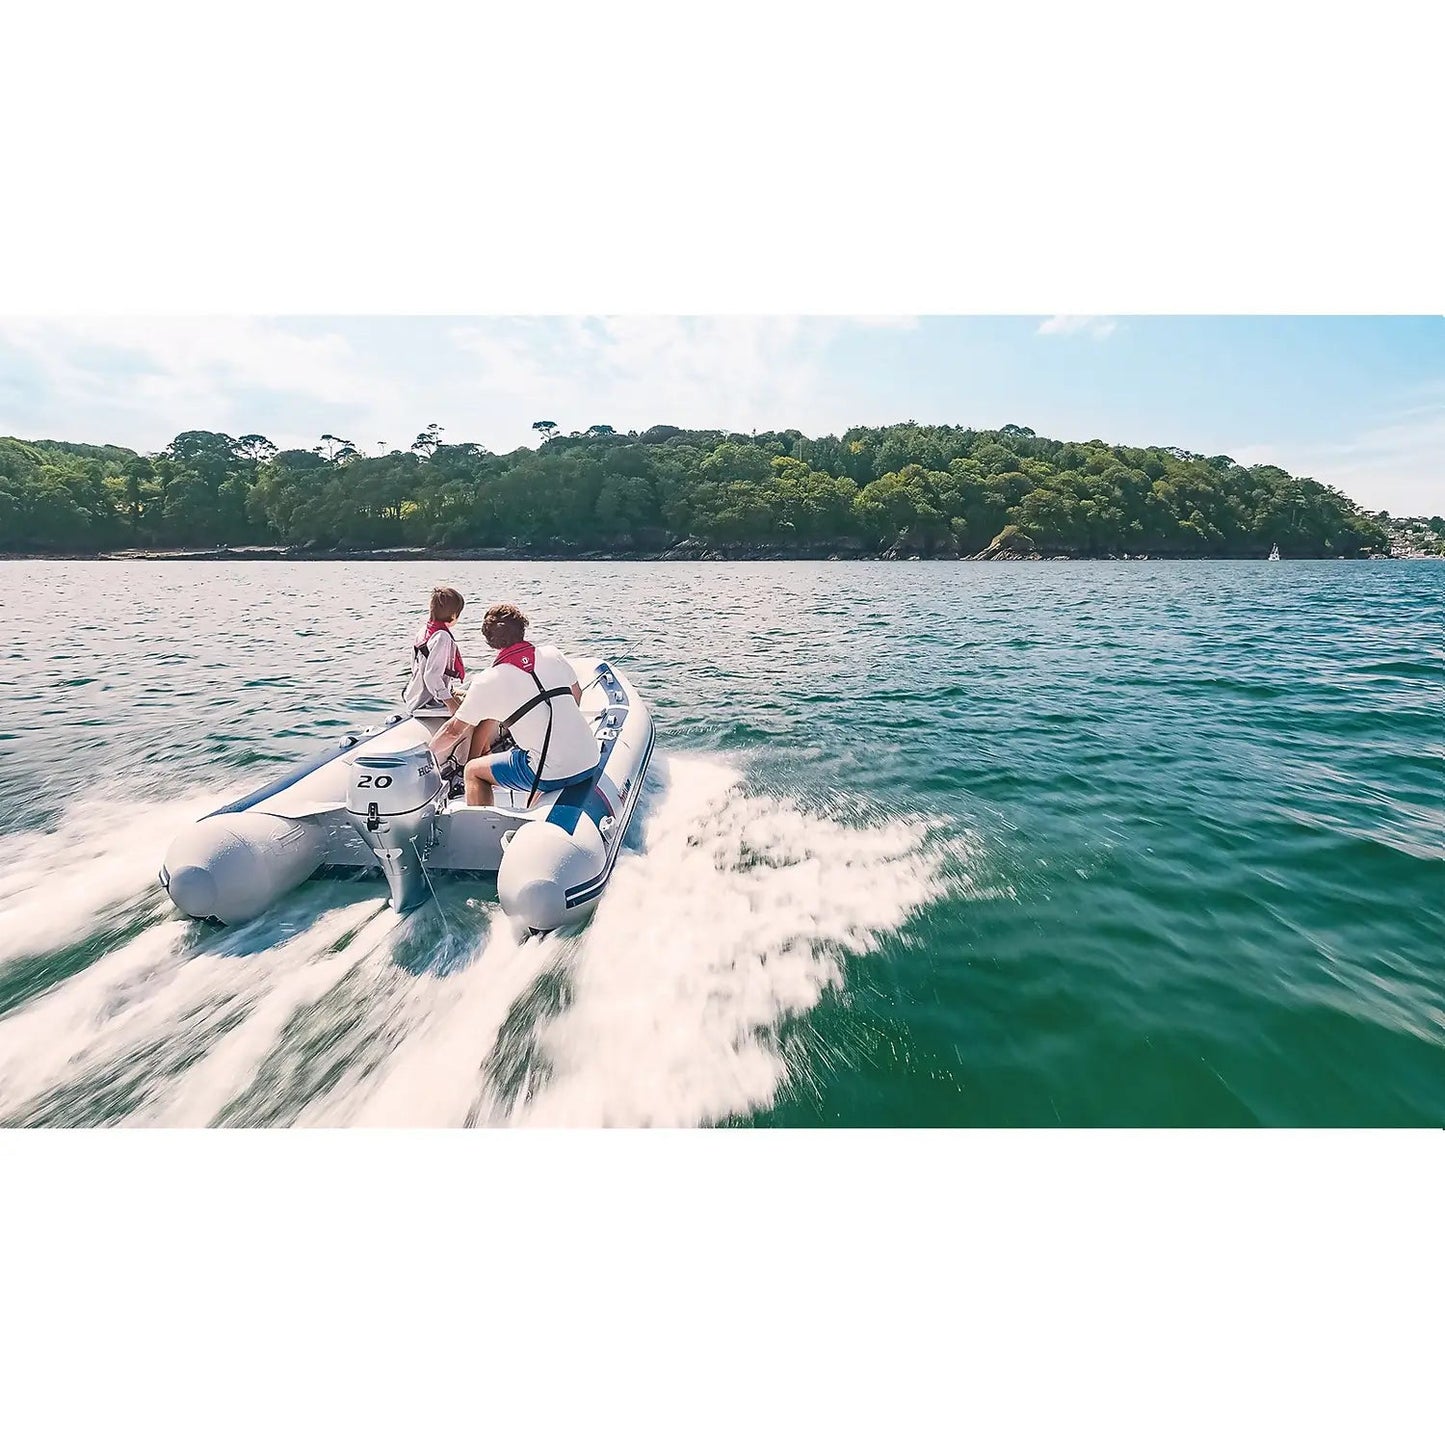 Honwave Package - T38IE3 3.8m Inflatable Boat Dinghy Air V-Floor & Honda Bf 20hp Outboard Engine